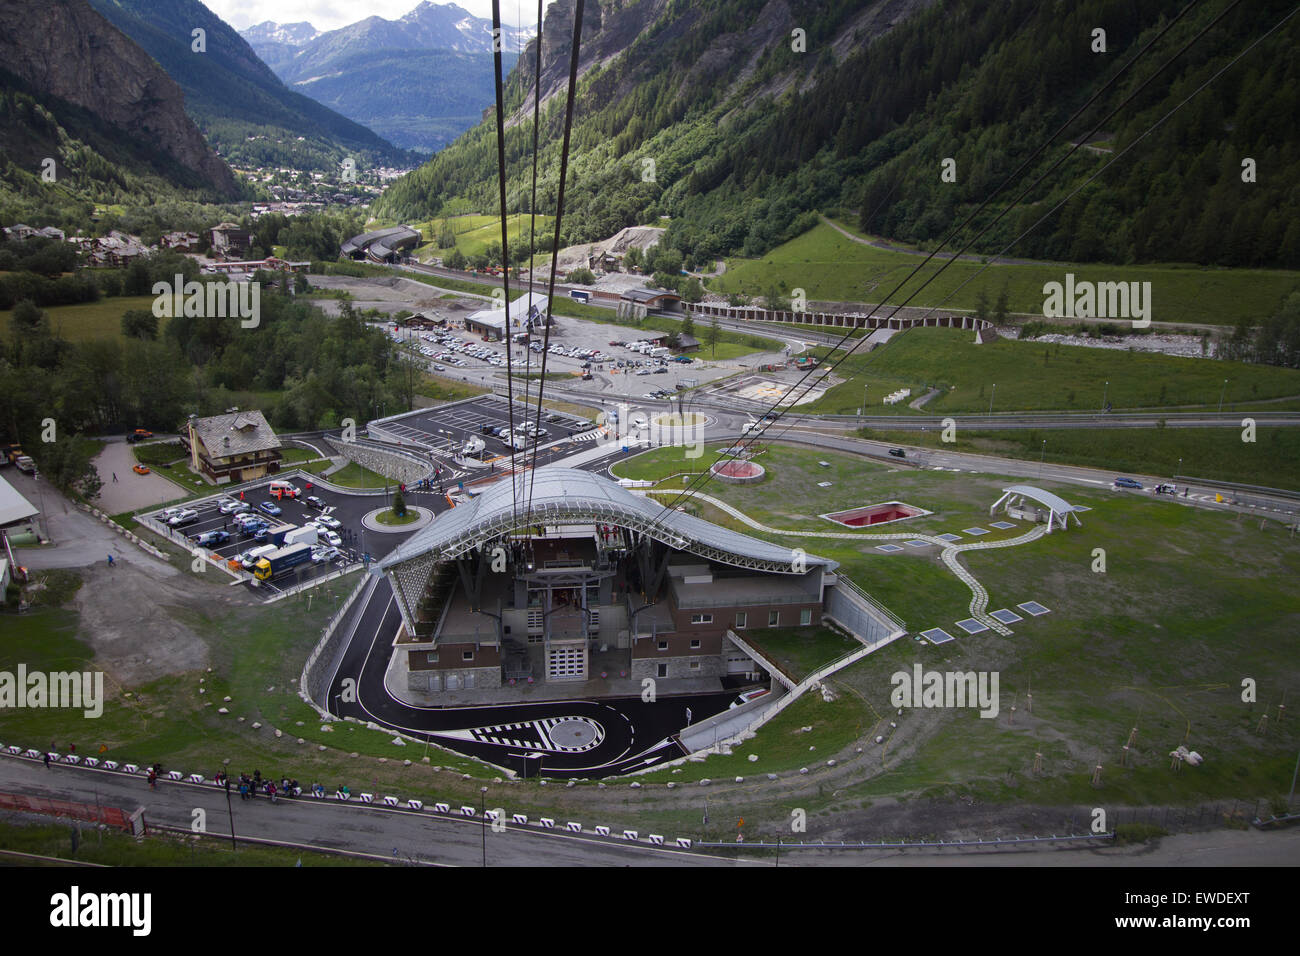 Courmayeur, Italy. 23rd June, 2015. The departing station of the new Skyway cable car that connects the city of Courmayeur to Pointe Helbronner (3,466 m) in the Mont Blanc massif. © Marco Destefanis/Pacific Press/Alamy Live News Stock Photo